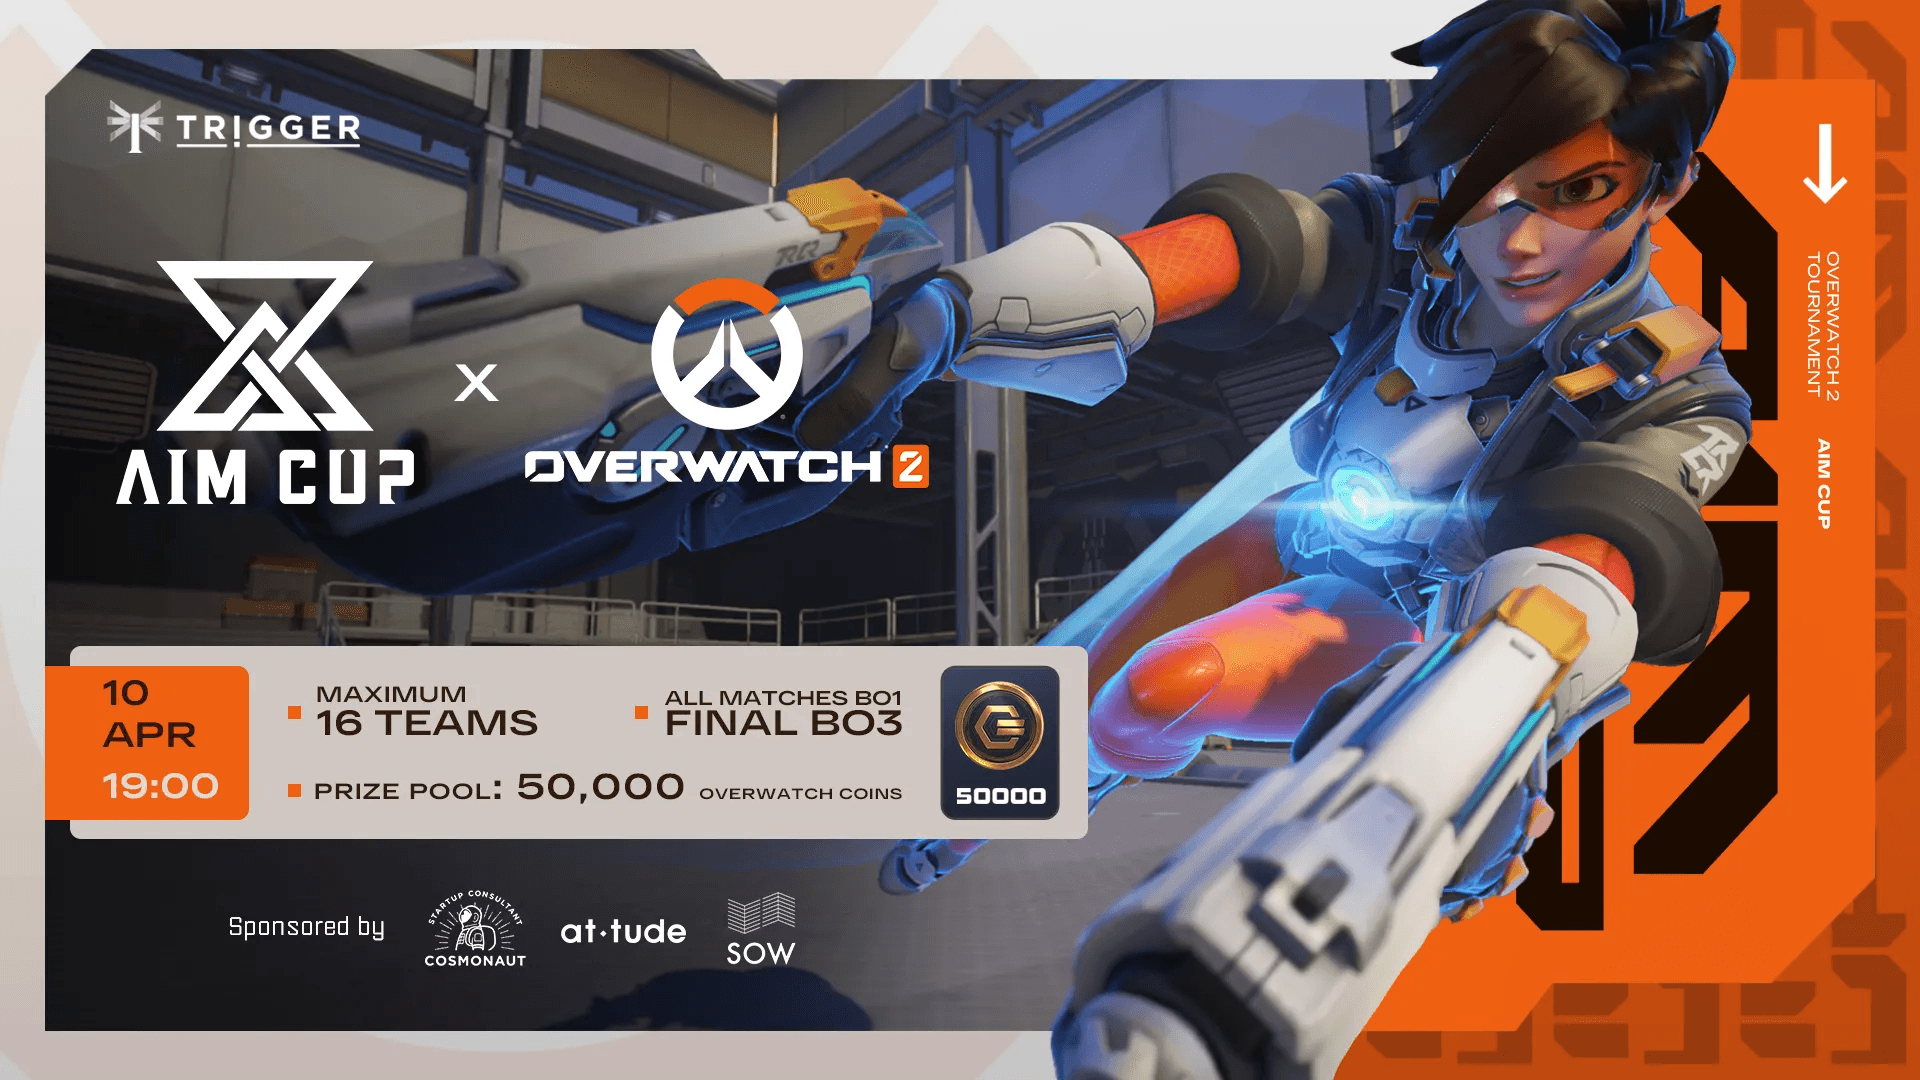 AIM CUP OVERWATCH2 feature image